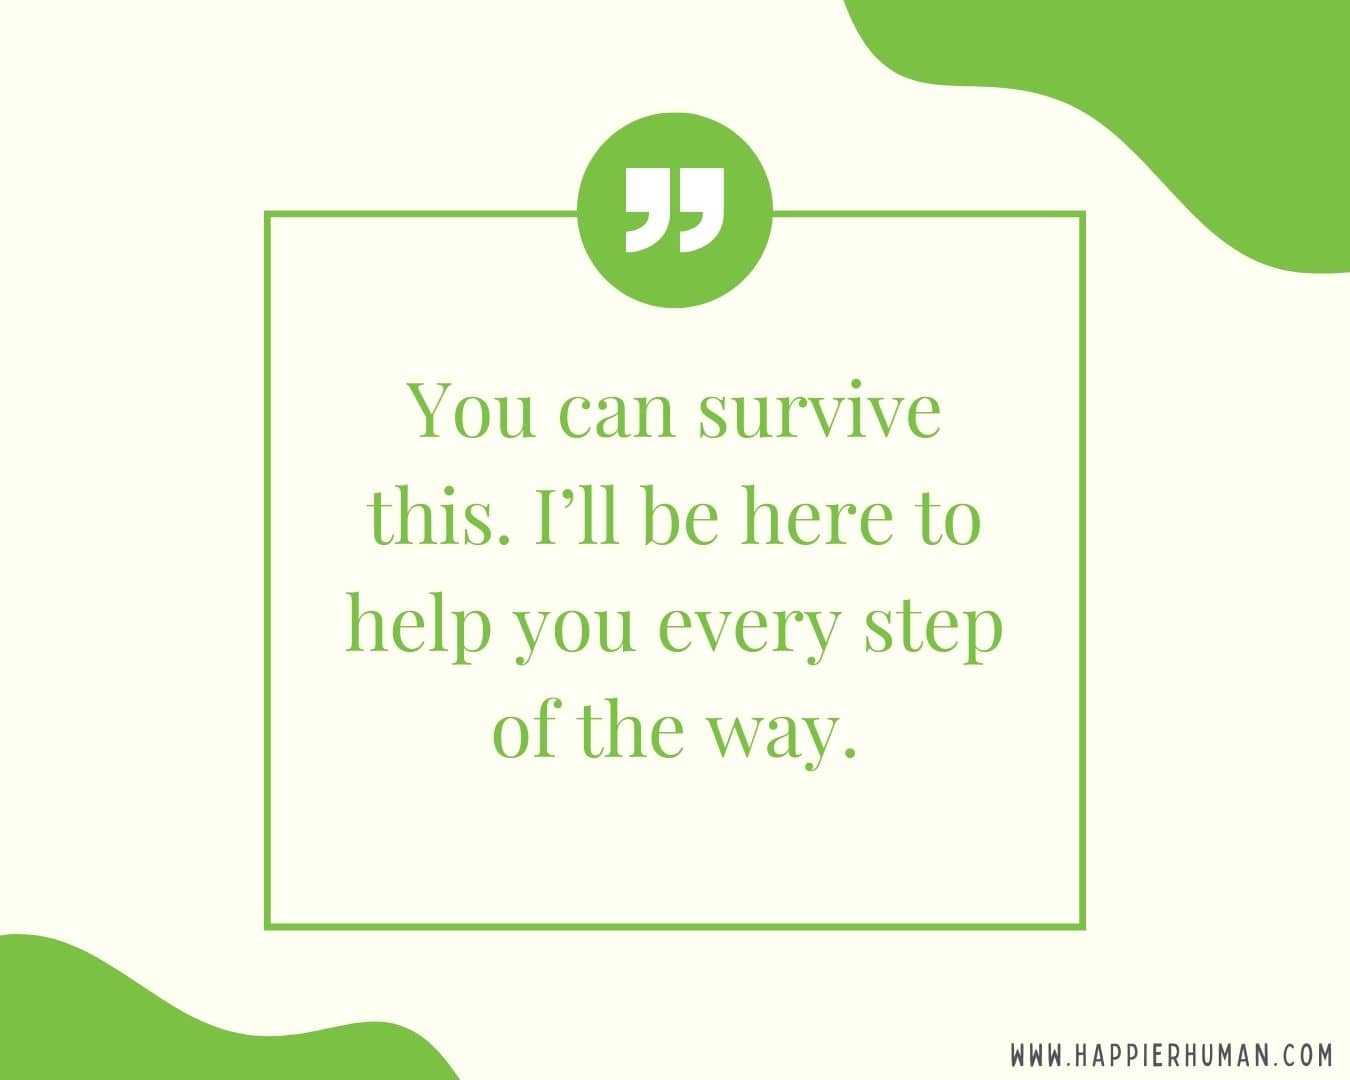 I’m Here for You Quotes - “You can survive this. I’ll be here to help you every step of the way.”